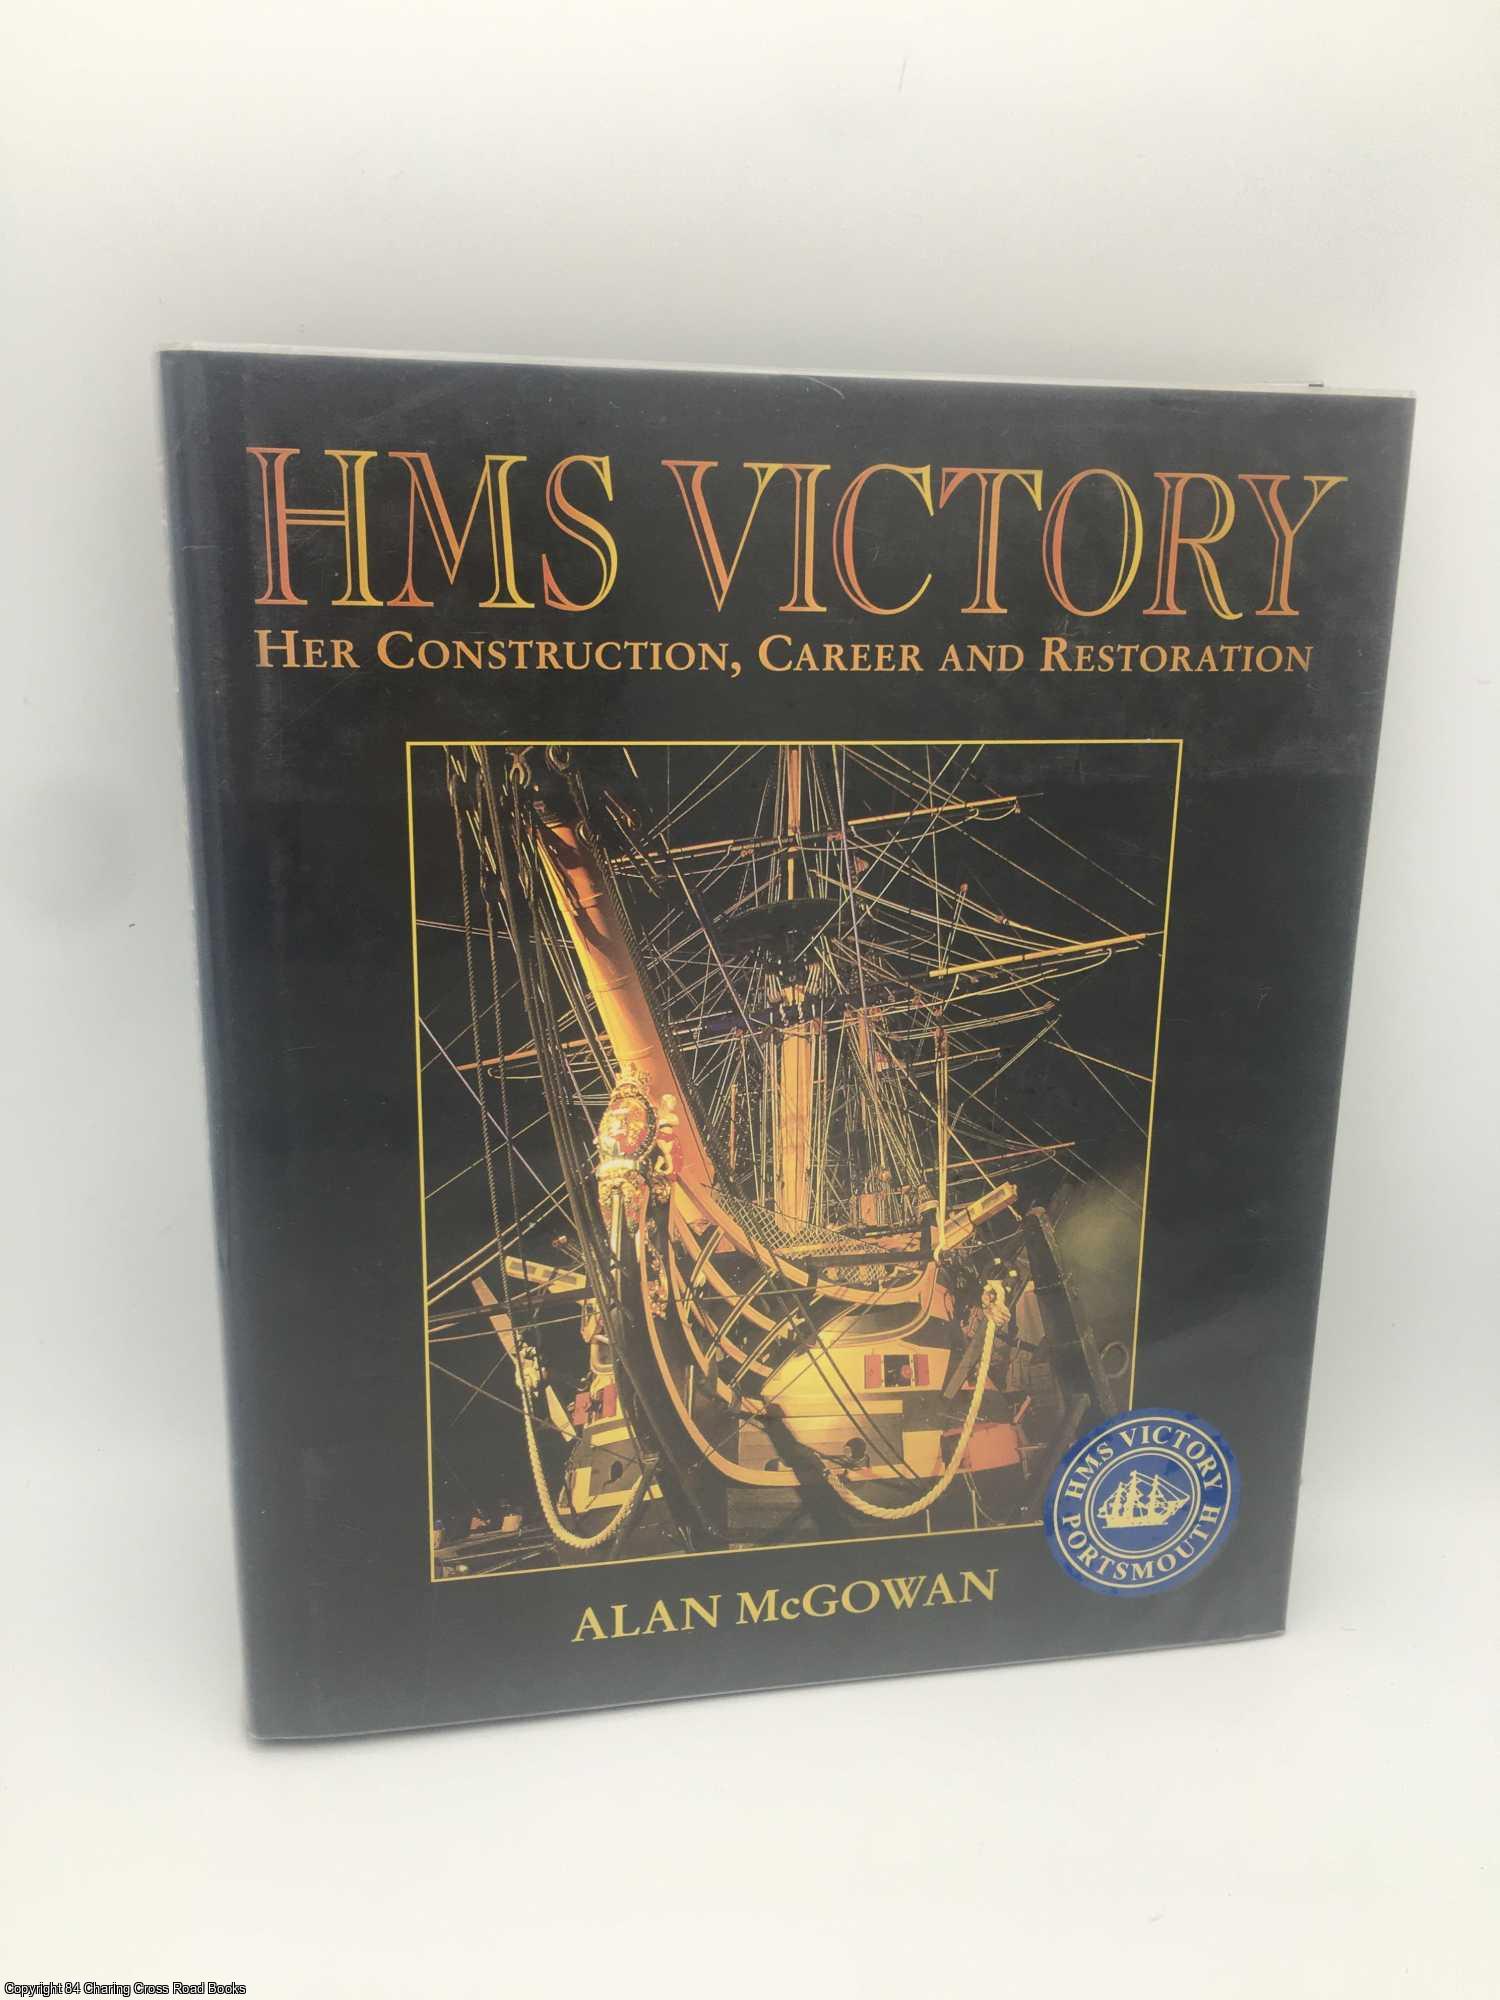 McGowan, Alan - HMS Victory: Her Construction, Career and Restoration